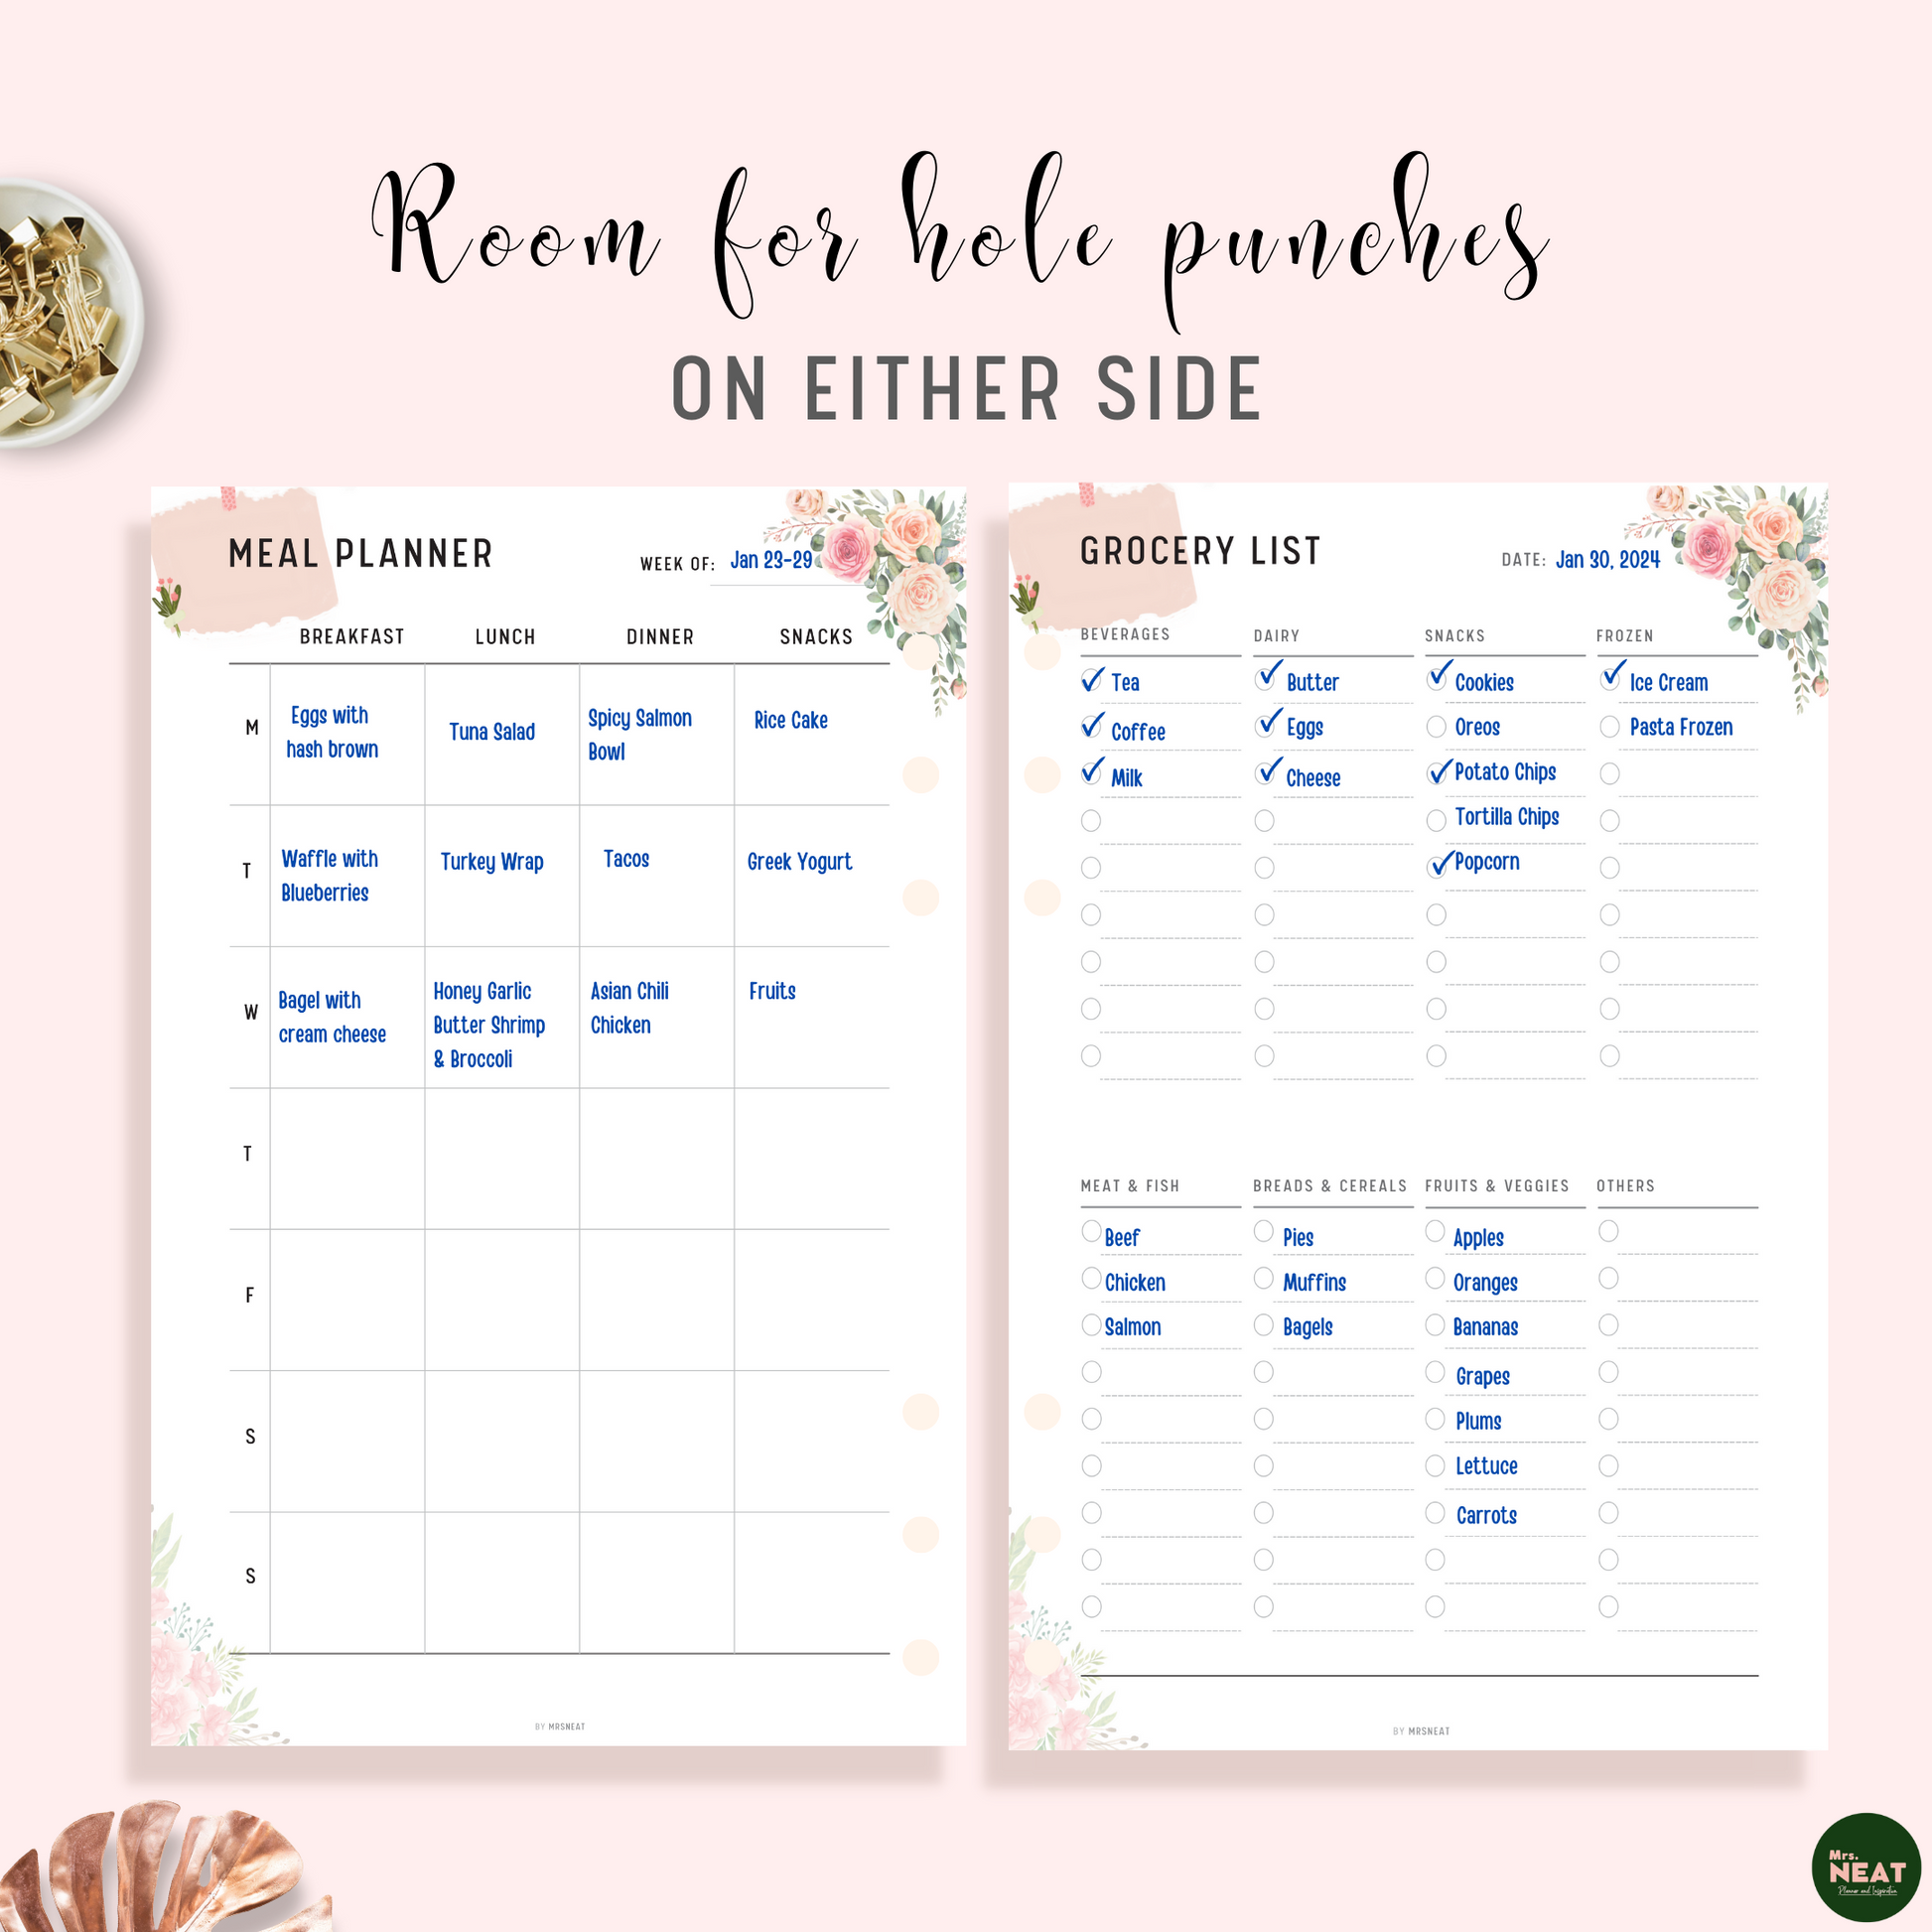 Floral Weekly Meal Planner and Grocery Shopping List Planner Printable with room for hole punches on either side